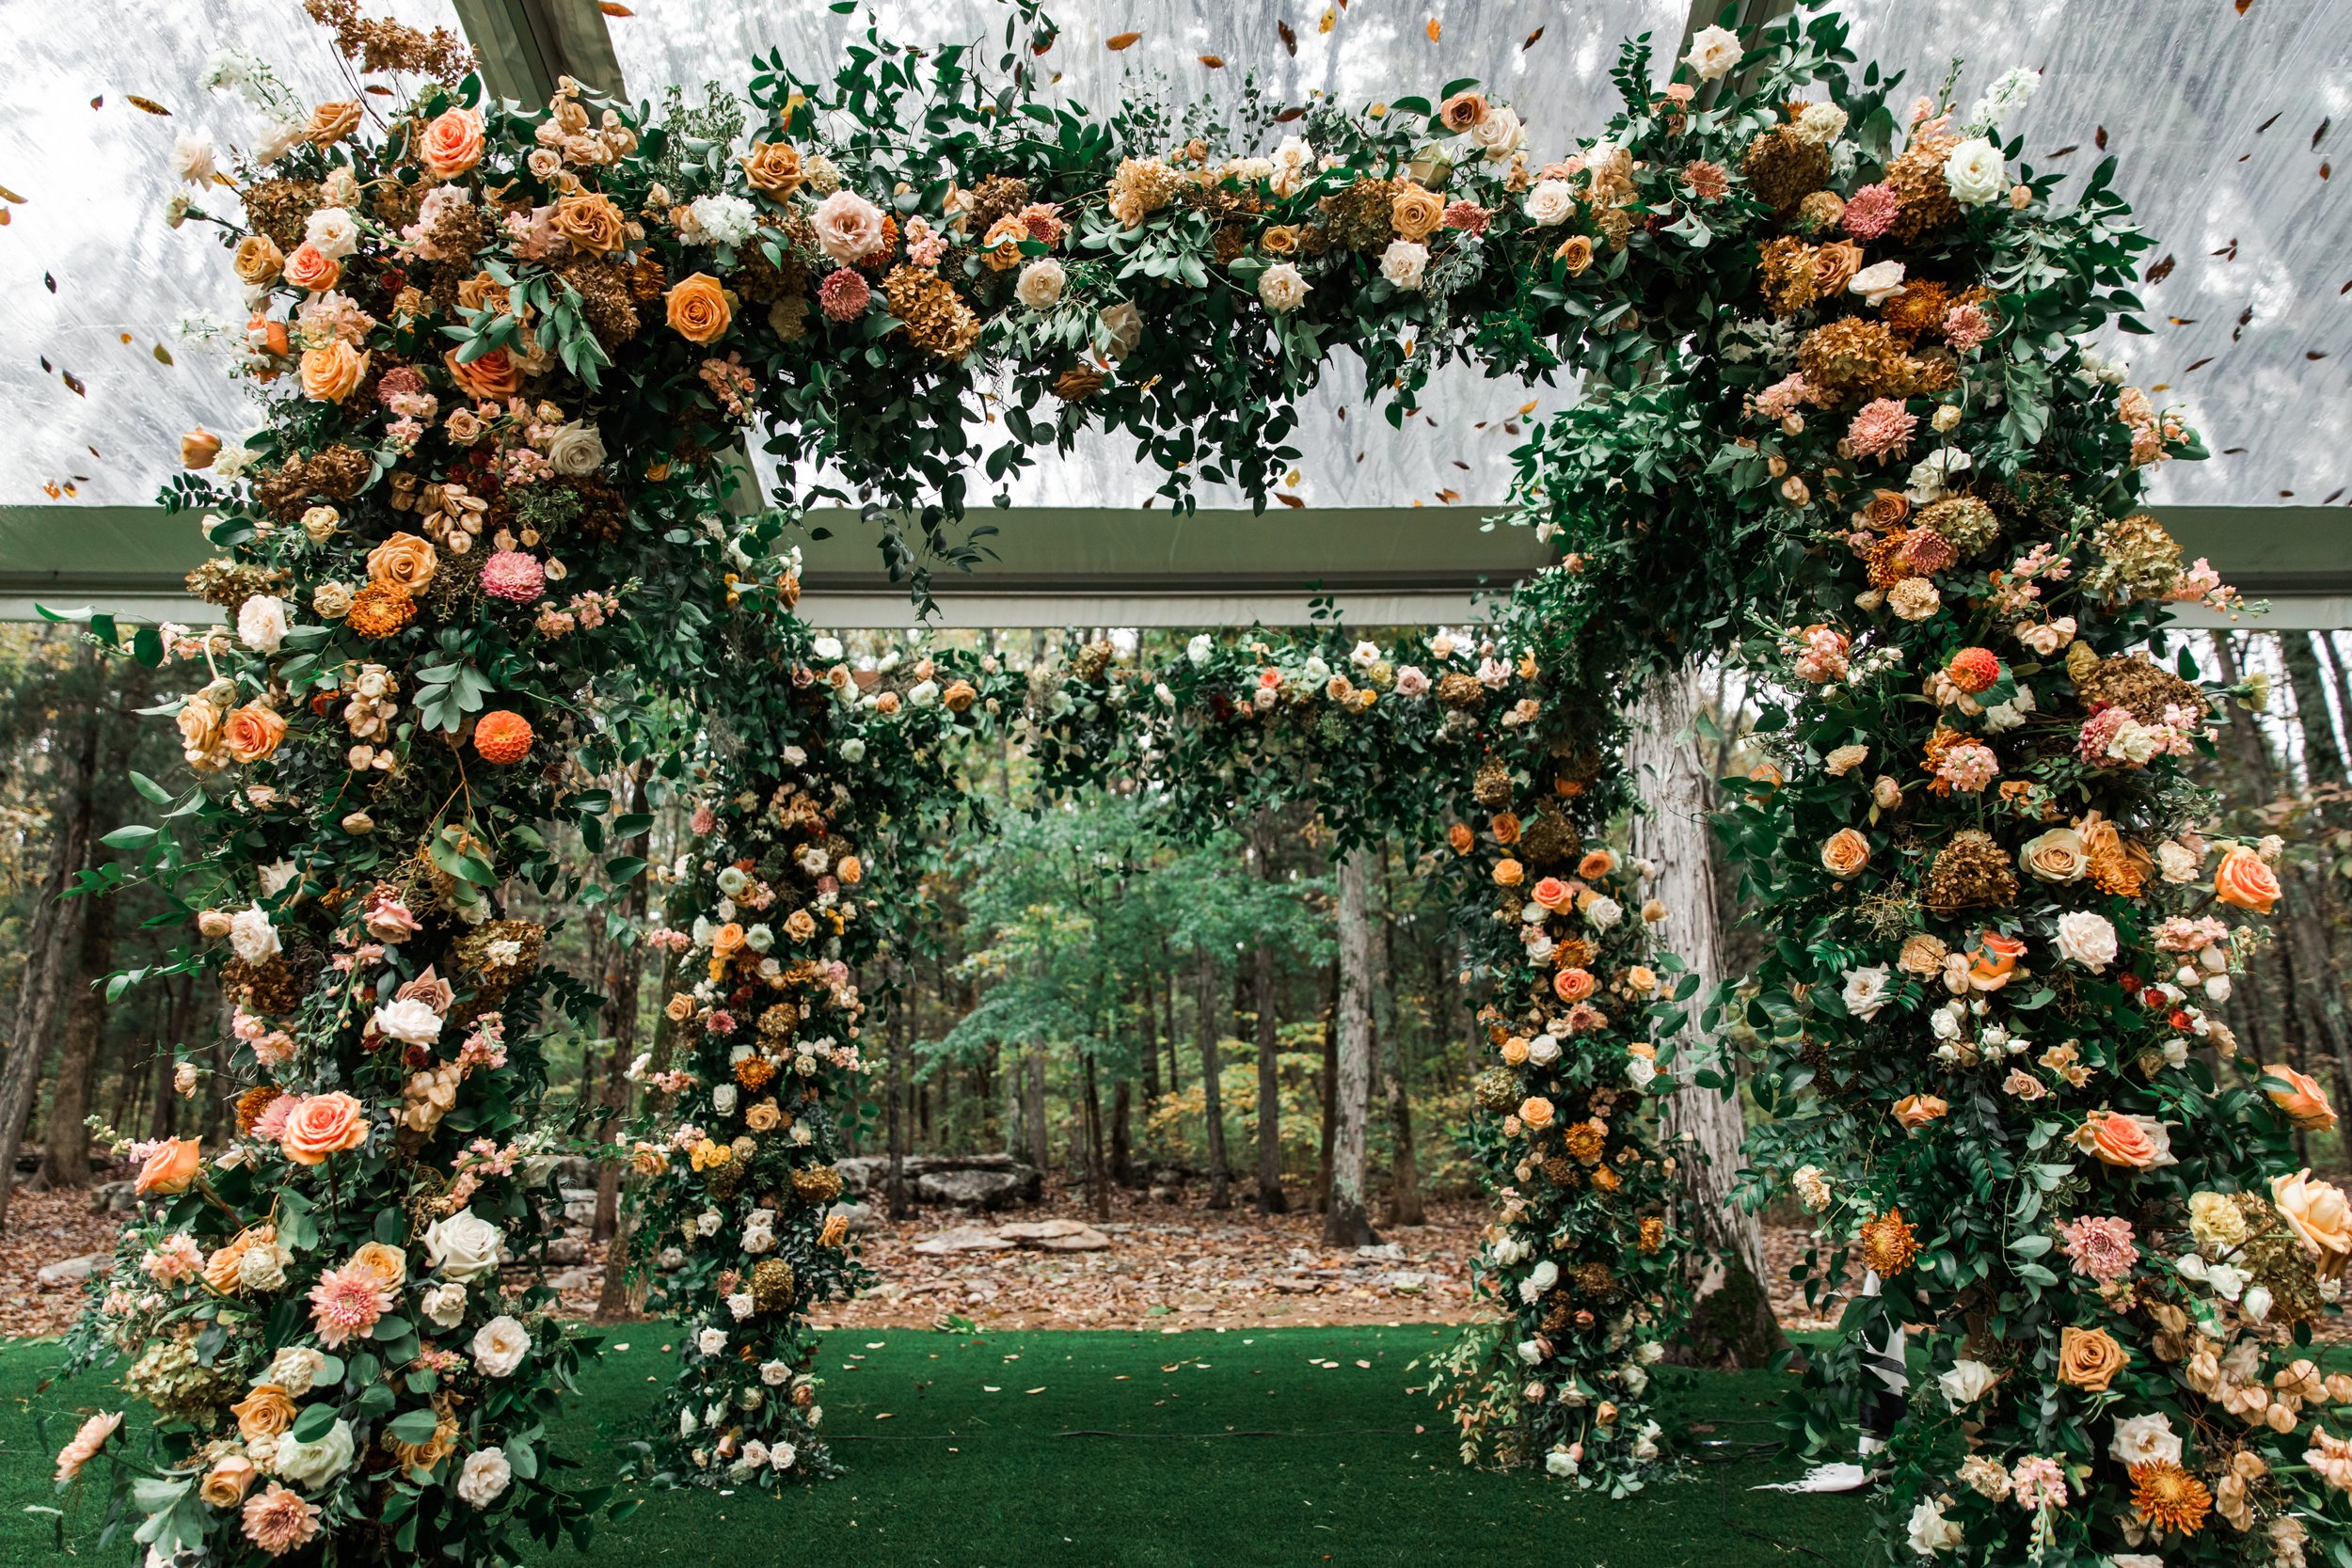 Eye-catching oversized chuppah overflowing with fall florals featuring dahlias, garden roses, rain tree pods, and fall greenery. Autumnal hues of terra cotta, dusty pink, copper, and yellow create this statement wedding piece. Designed by Rosemary an